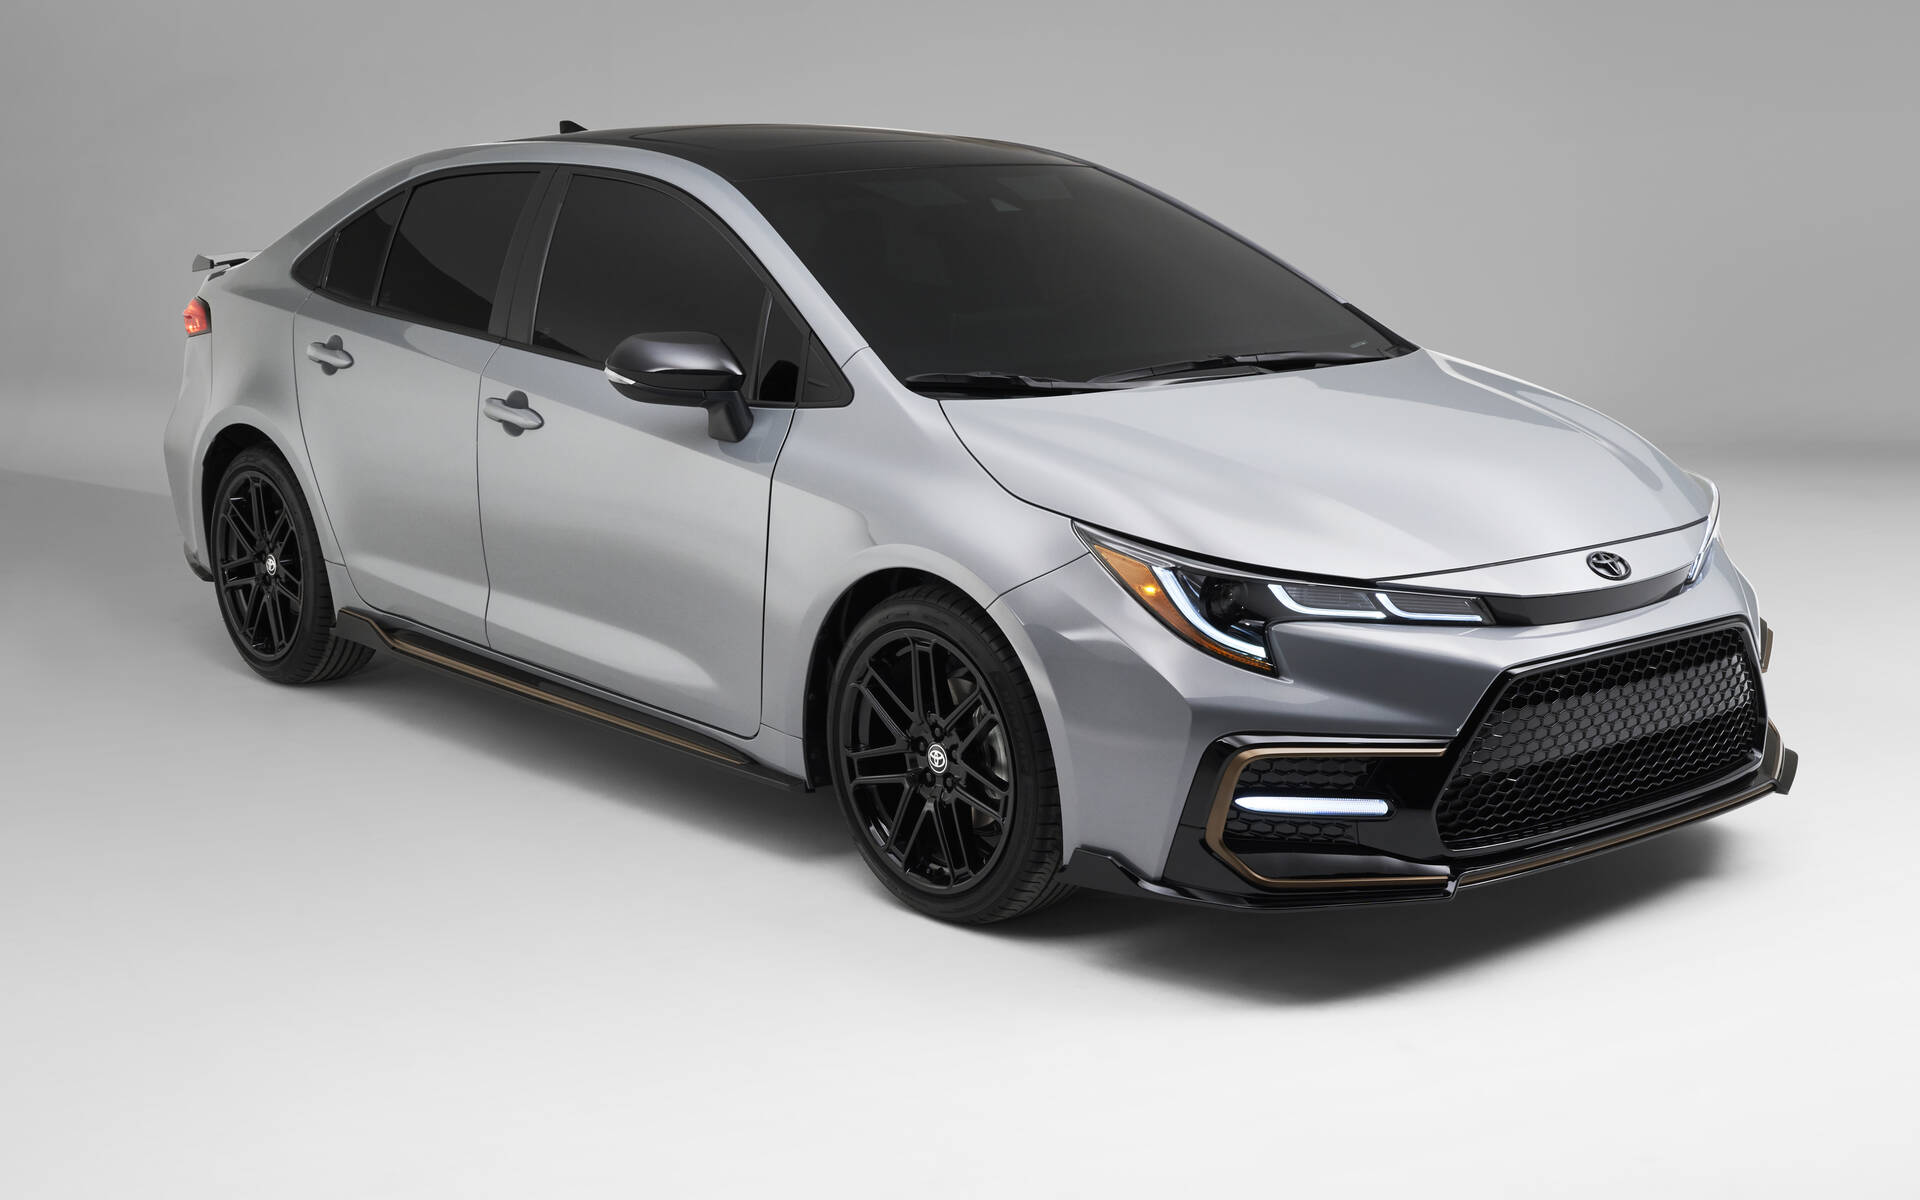 What is the Toyota Corolla Top Speed For 2021?